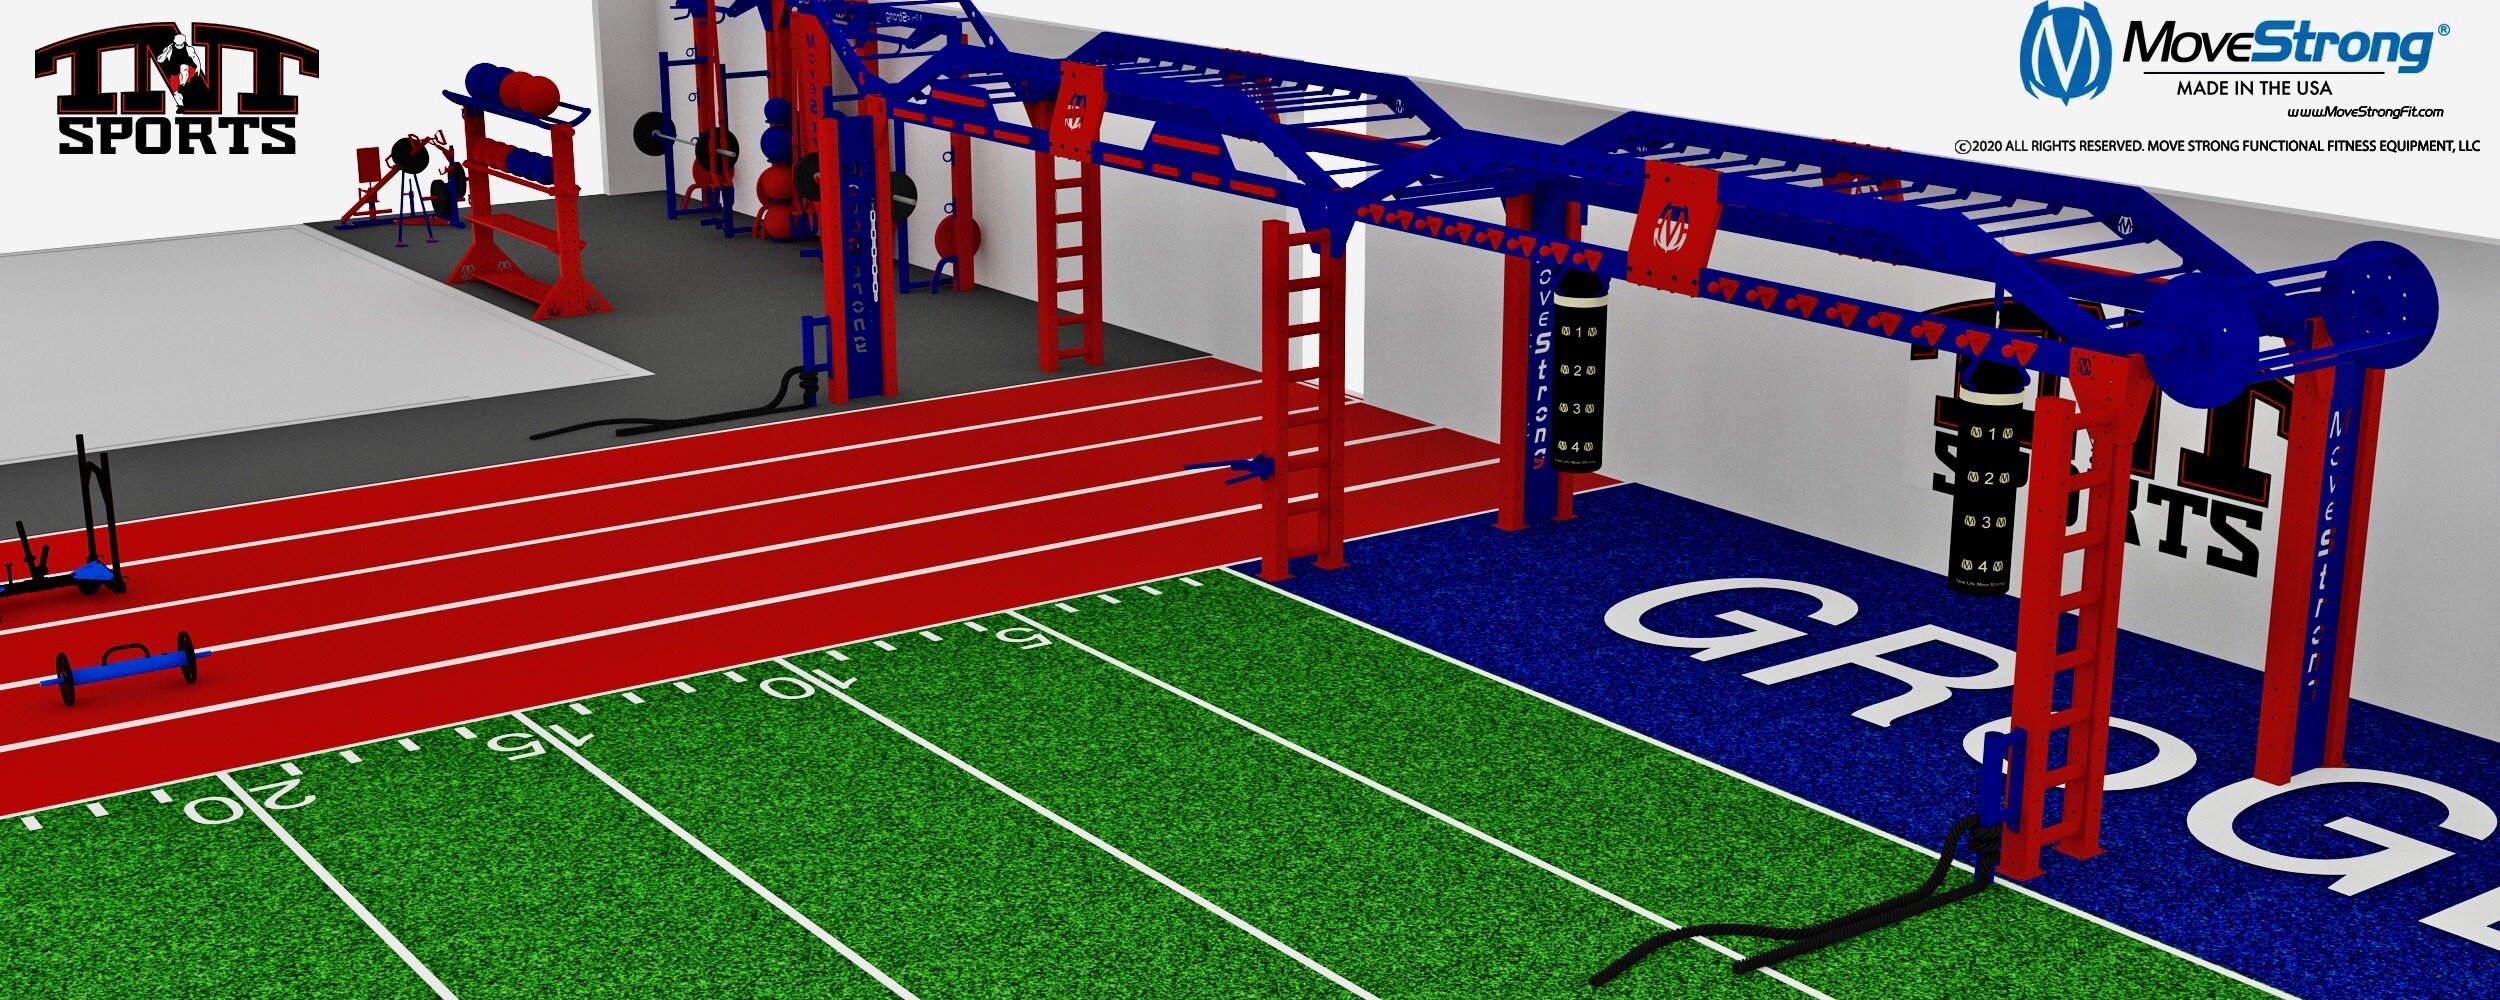 MoveStrong Custom Gym Design Services